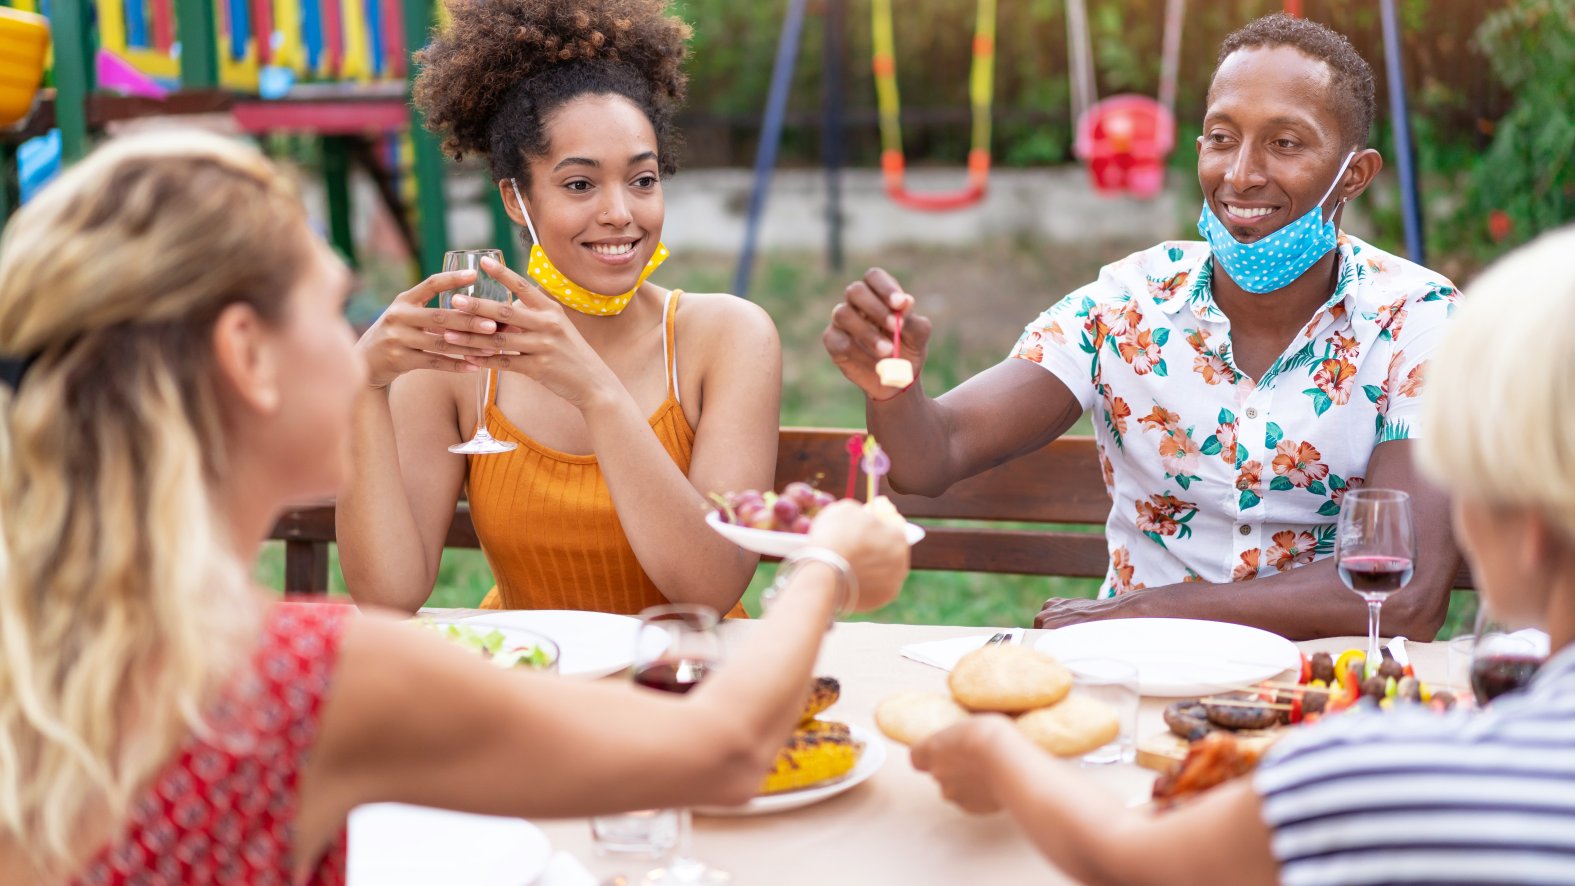 Memorial Day 2021: Do We Need to Wear Masks at an Outdoor Barbecue